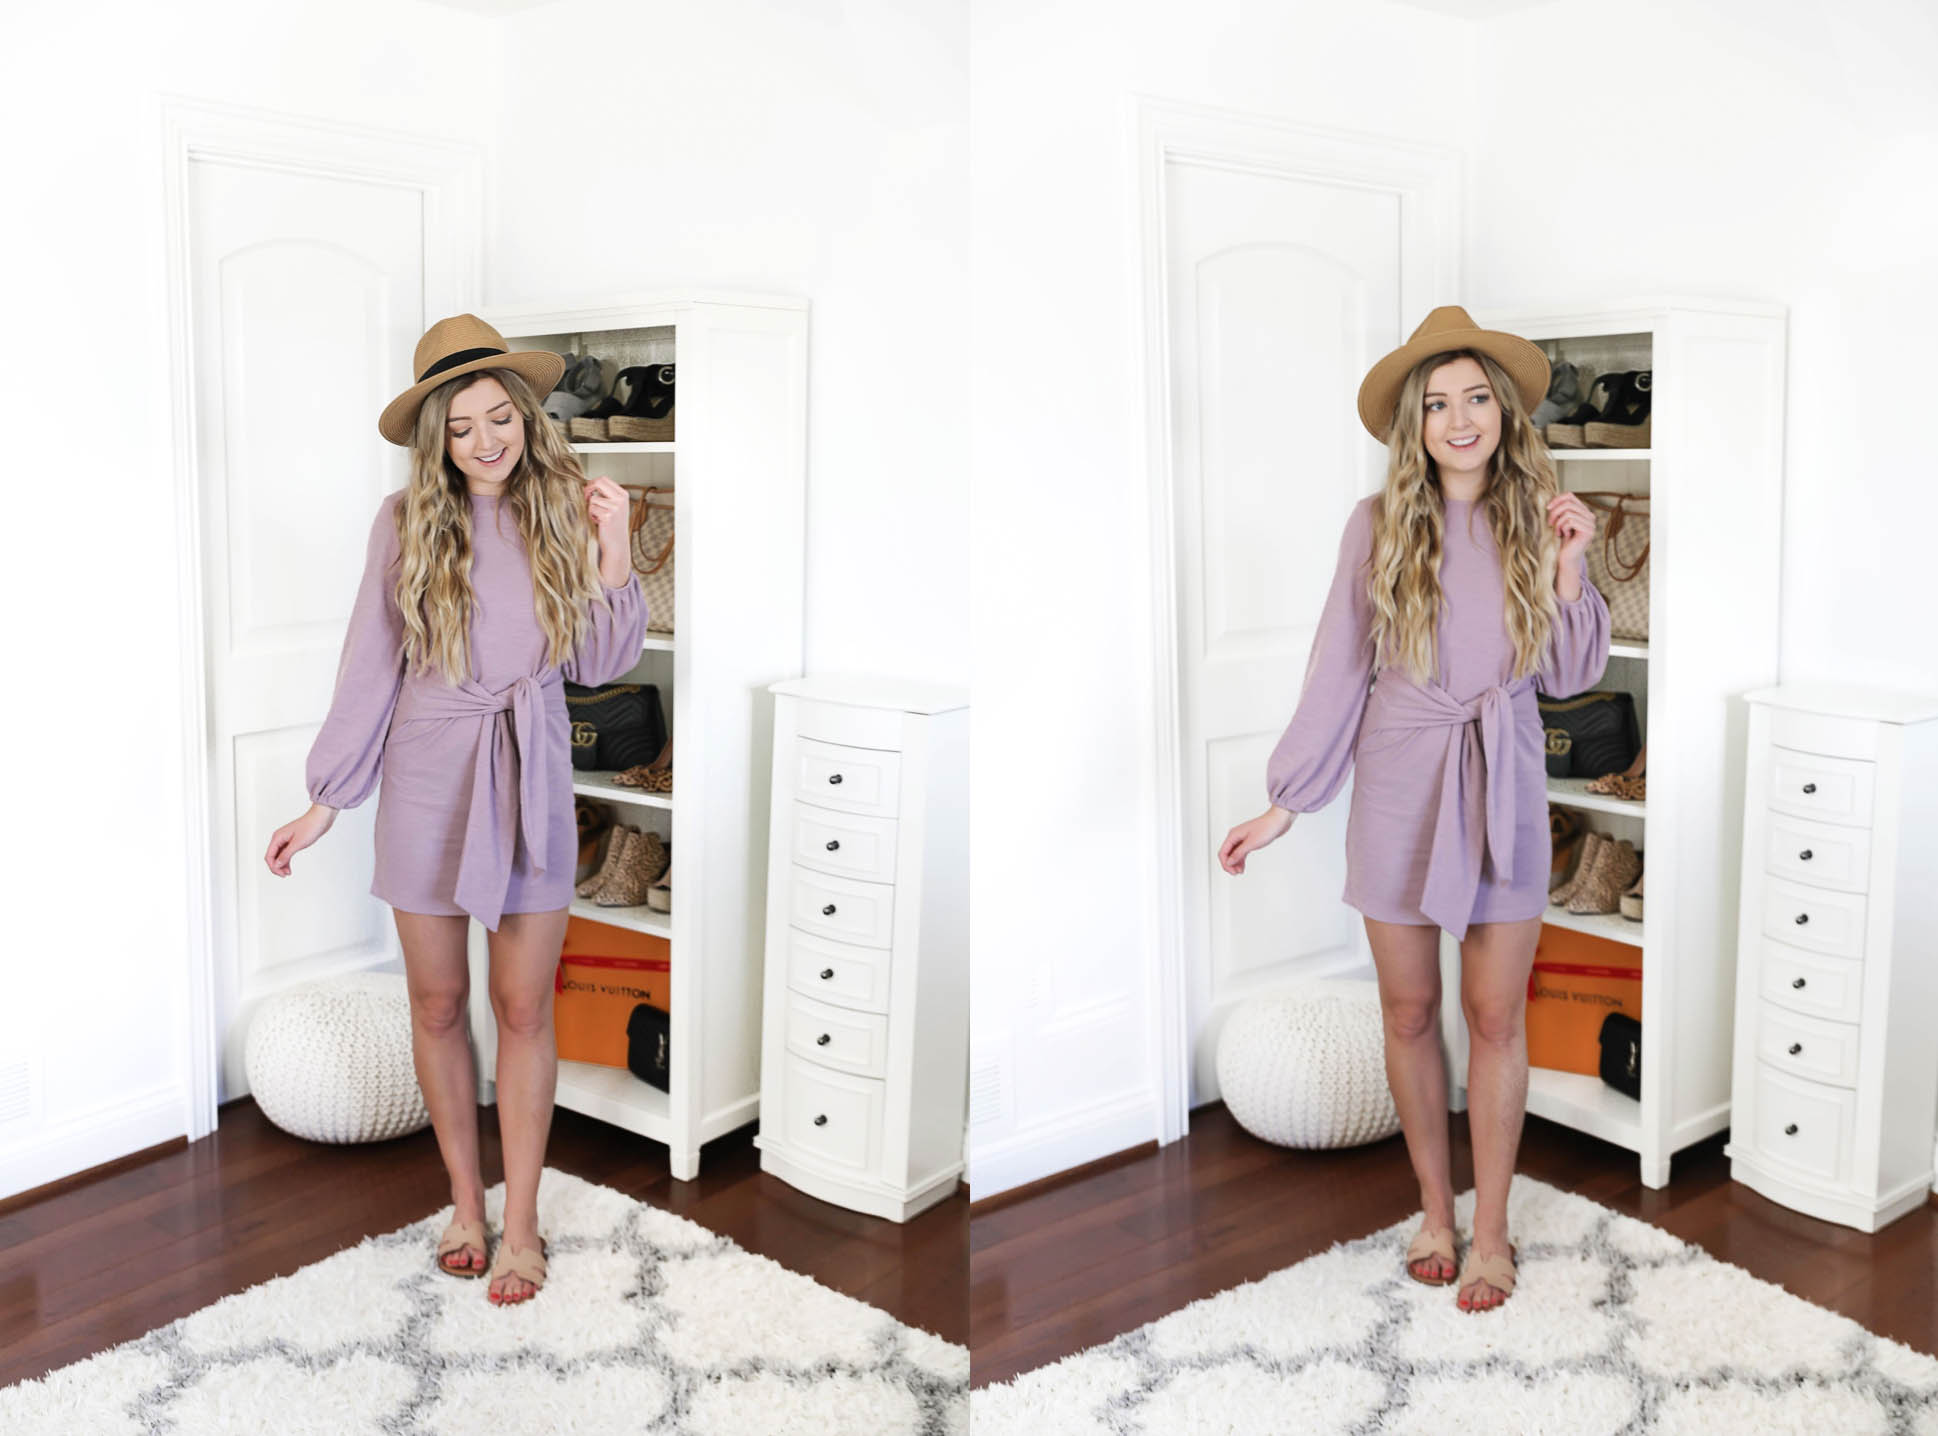 Amazon spring fashion haul! The cutest inexpensive clothing, fun sweaters, tops, dresses, and ore! Check out my ootd on fashion blog daily dose of charm by lauren lindmark